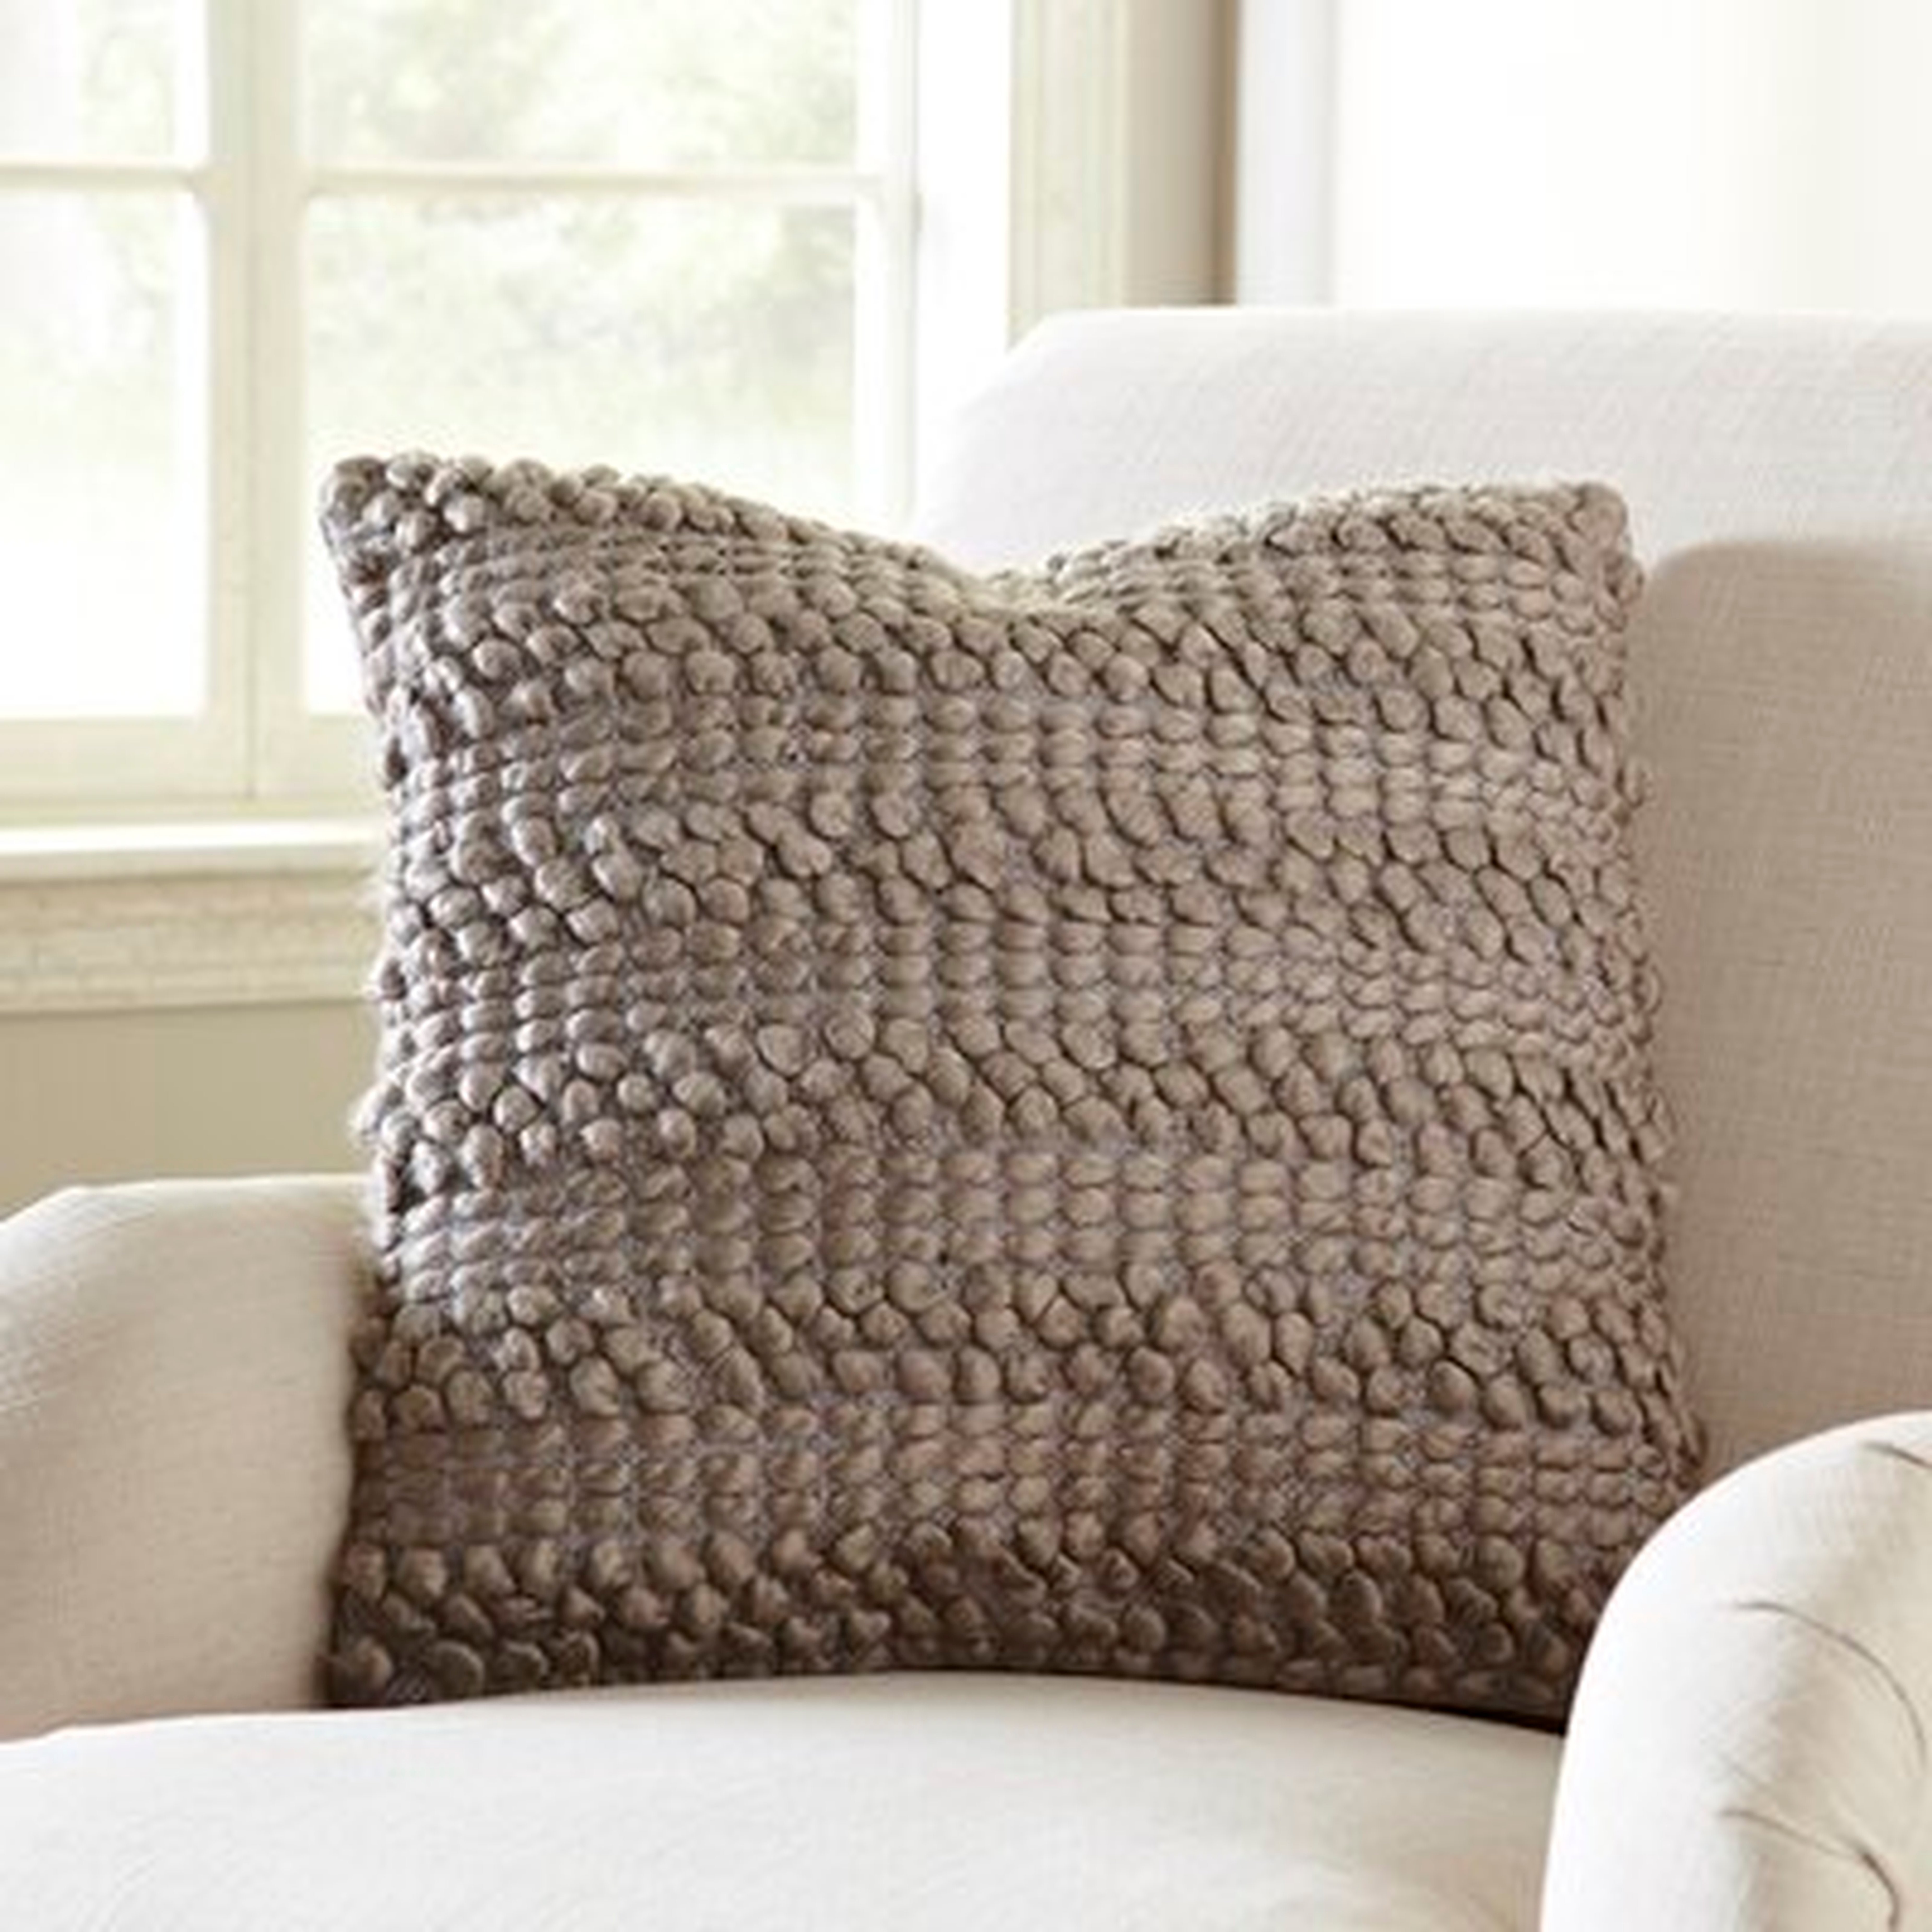 Demorest Square Pillow Cover and Insert - Birch Lane